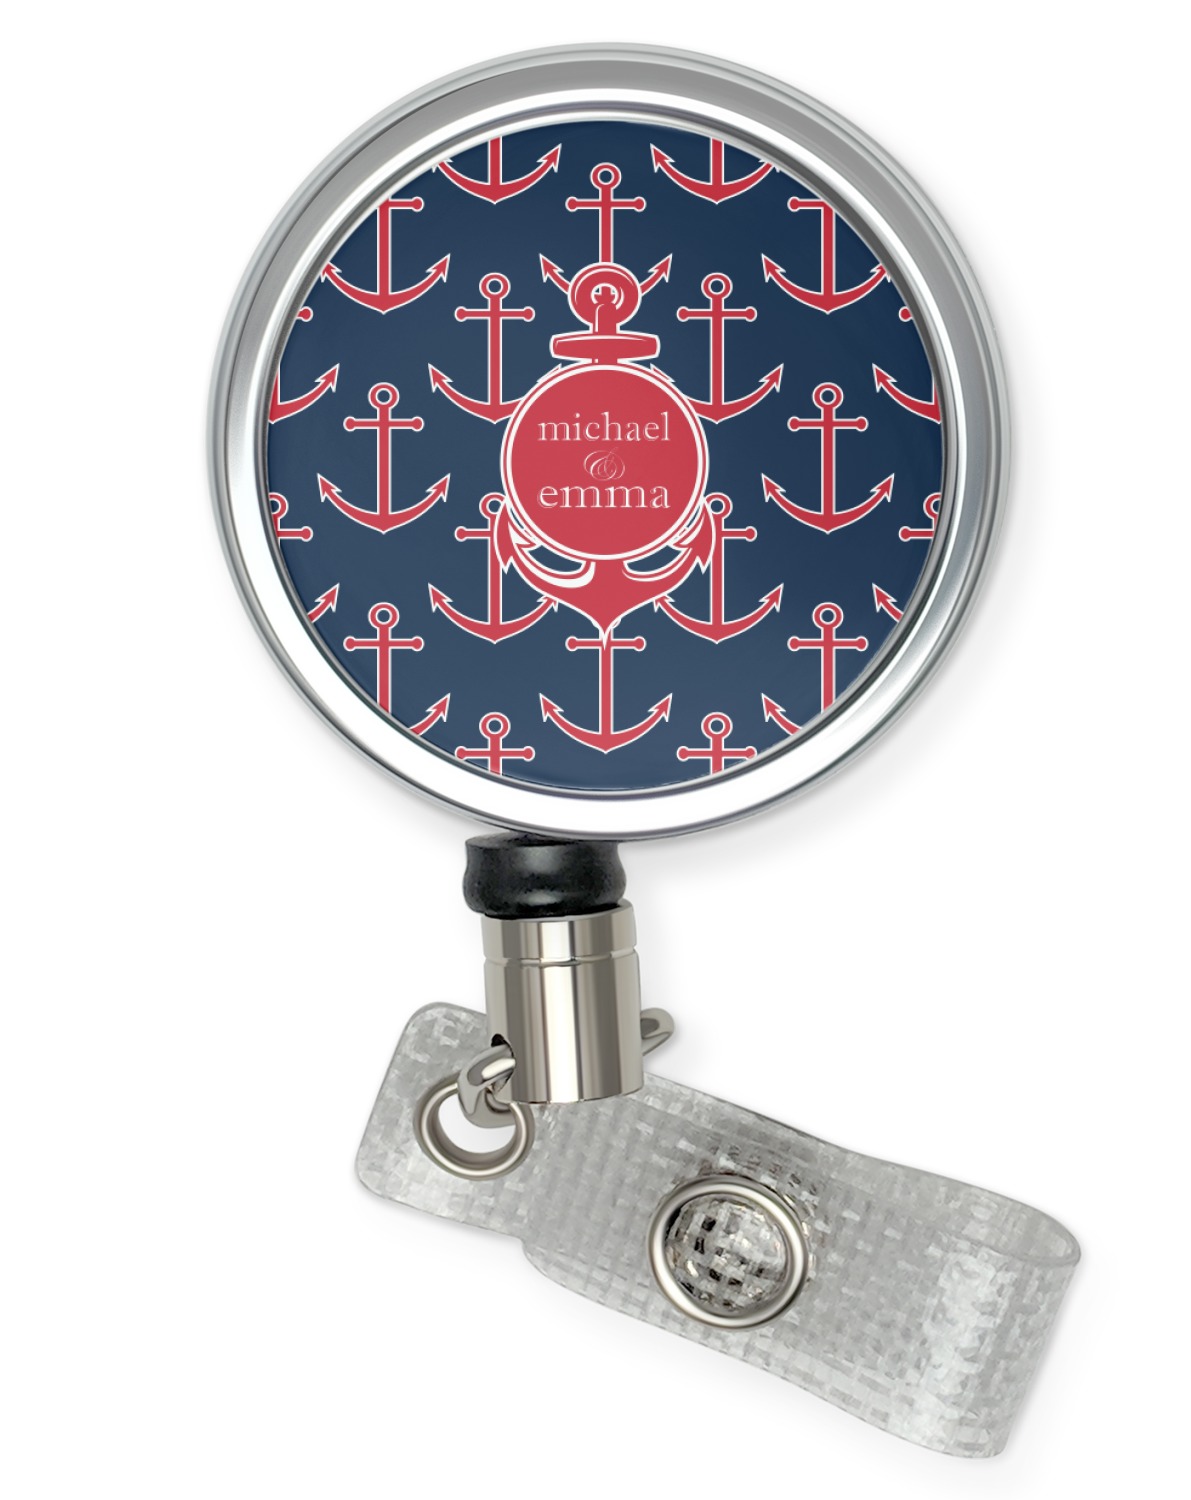 https://www.youcustomizeit.com/common/MAKE/358224/All-Anchors-Retractable-Badge-Reel-Flat.jpg?lm=1555416134